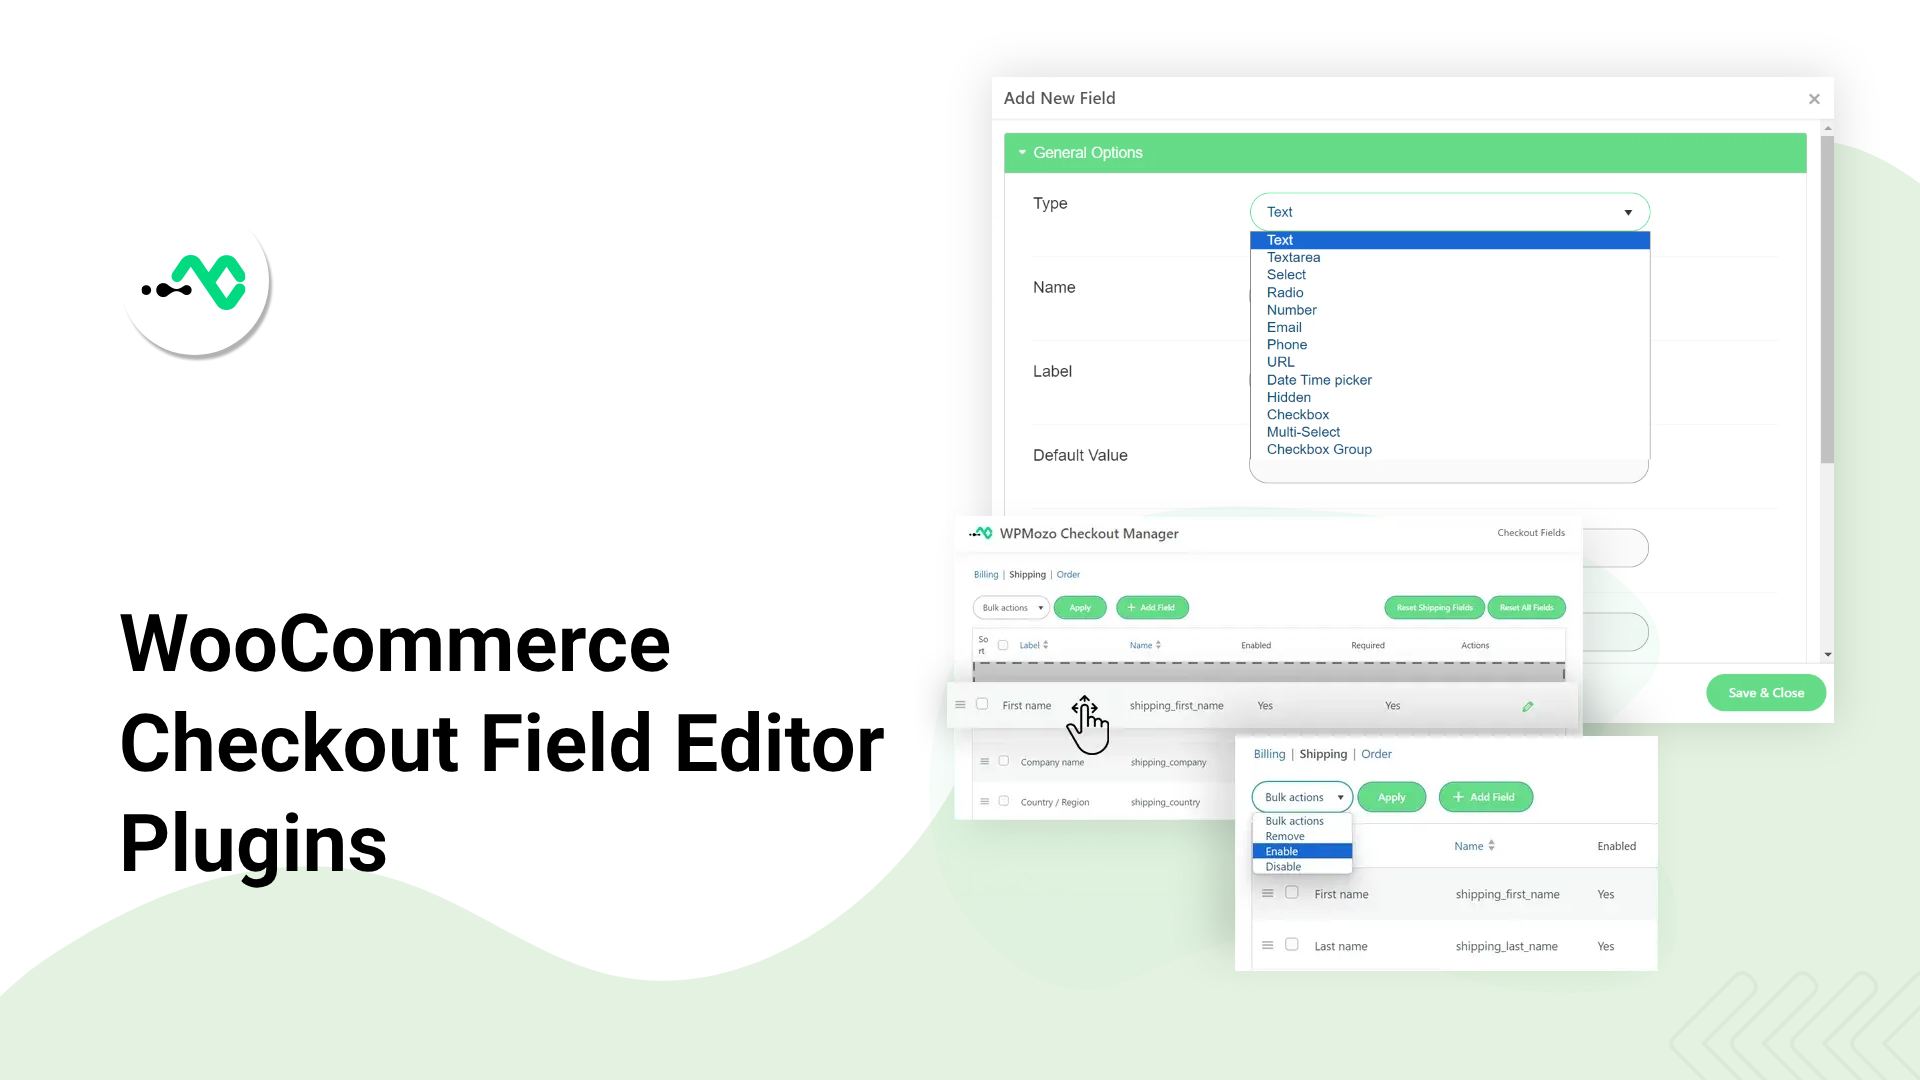 WooCommerce Checkout Field Editor Plugins